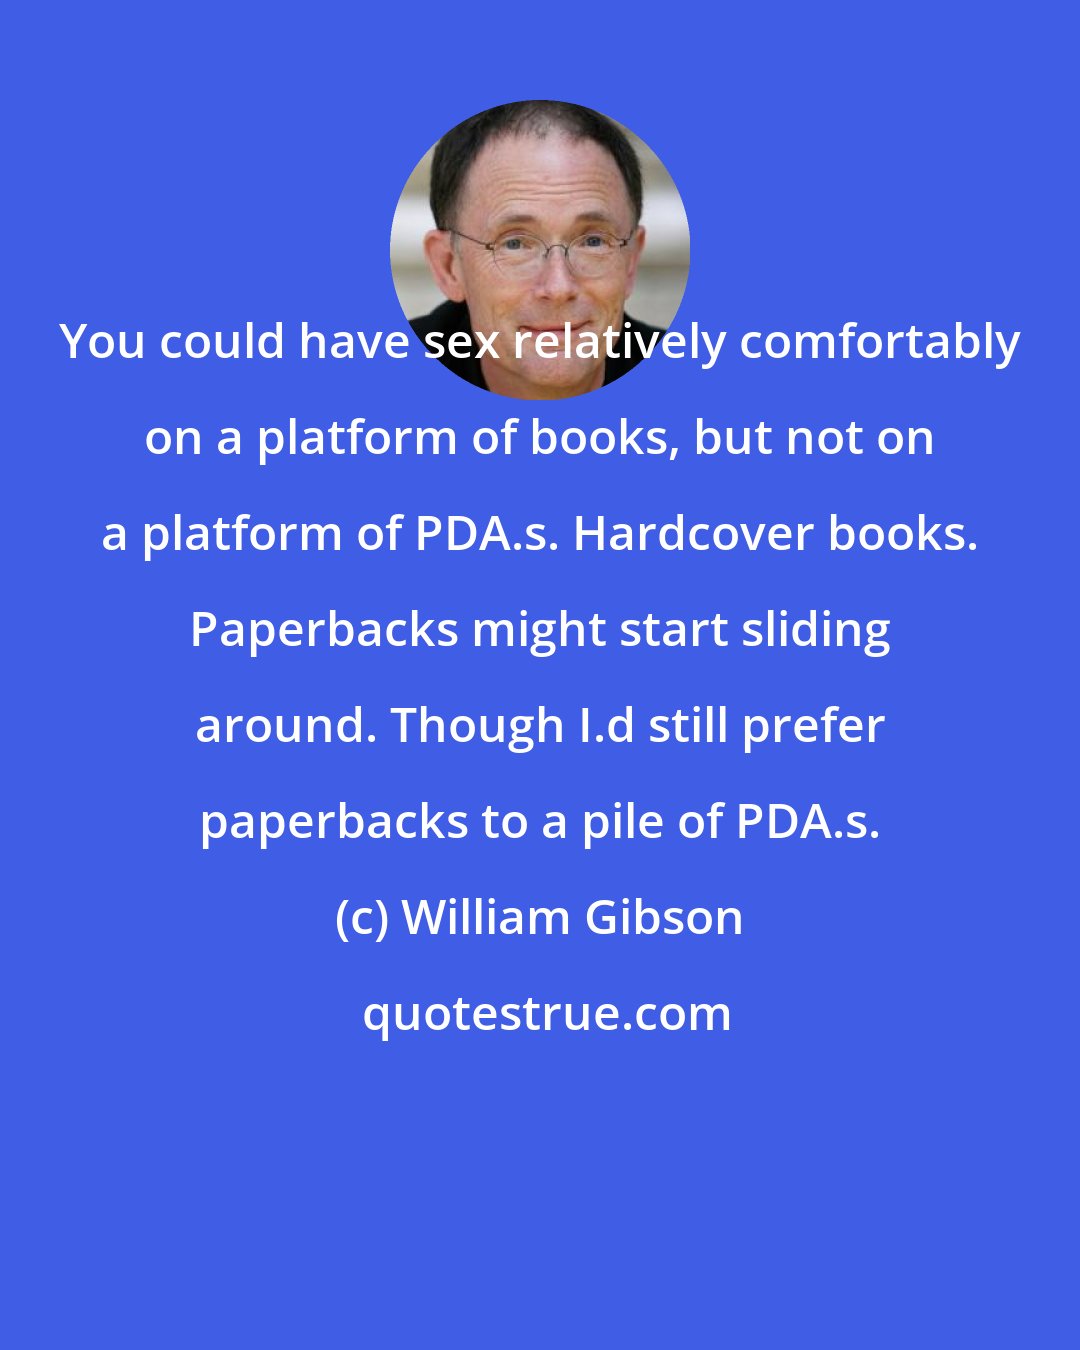 William Gibson: You could have sex relatively comfortably on a platform of books, but not on a platform of PDA.s. Hardcover books. Paperbacks might start sliding around. Though I.d still prefer paperbacks to a pile of PDA.s.